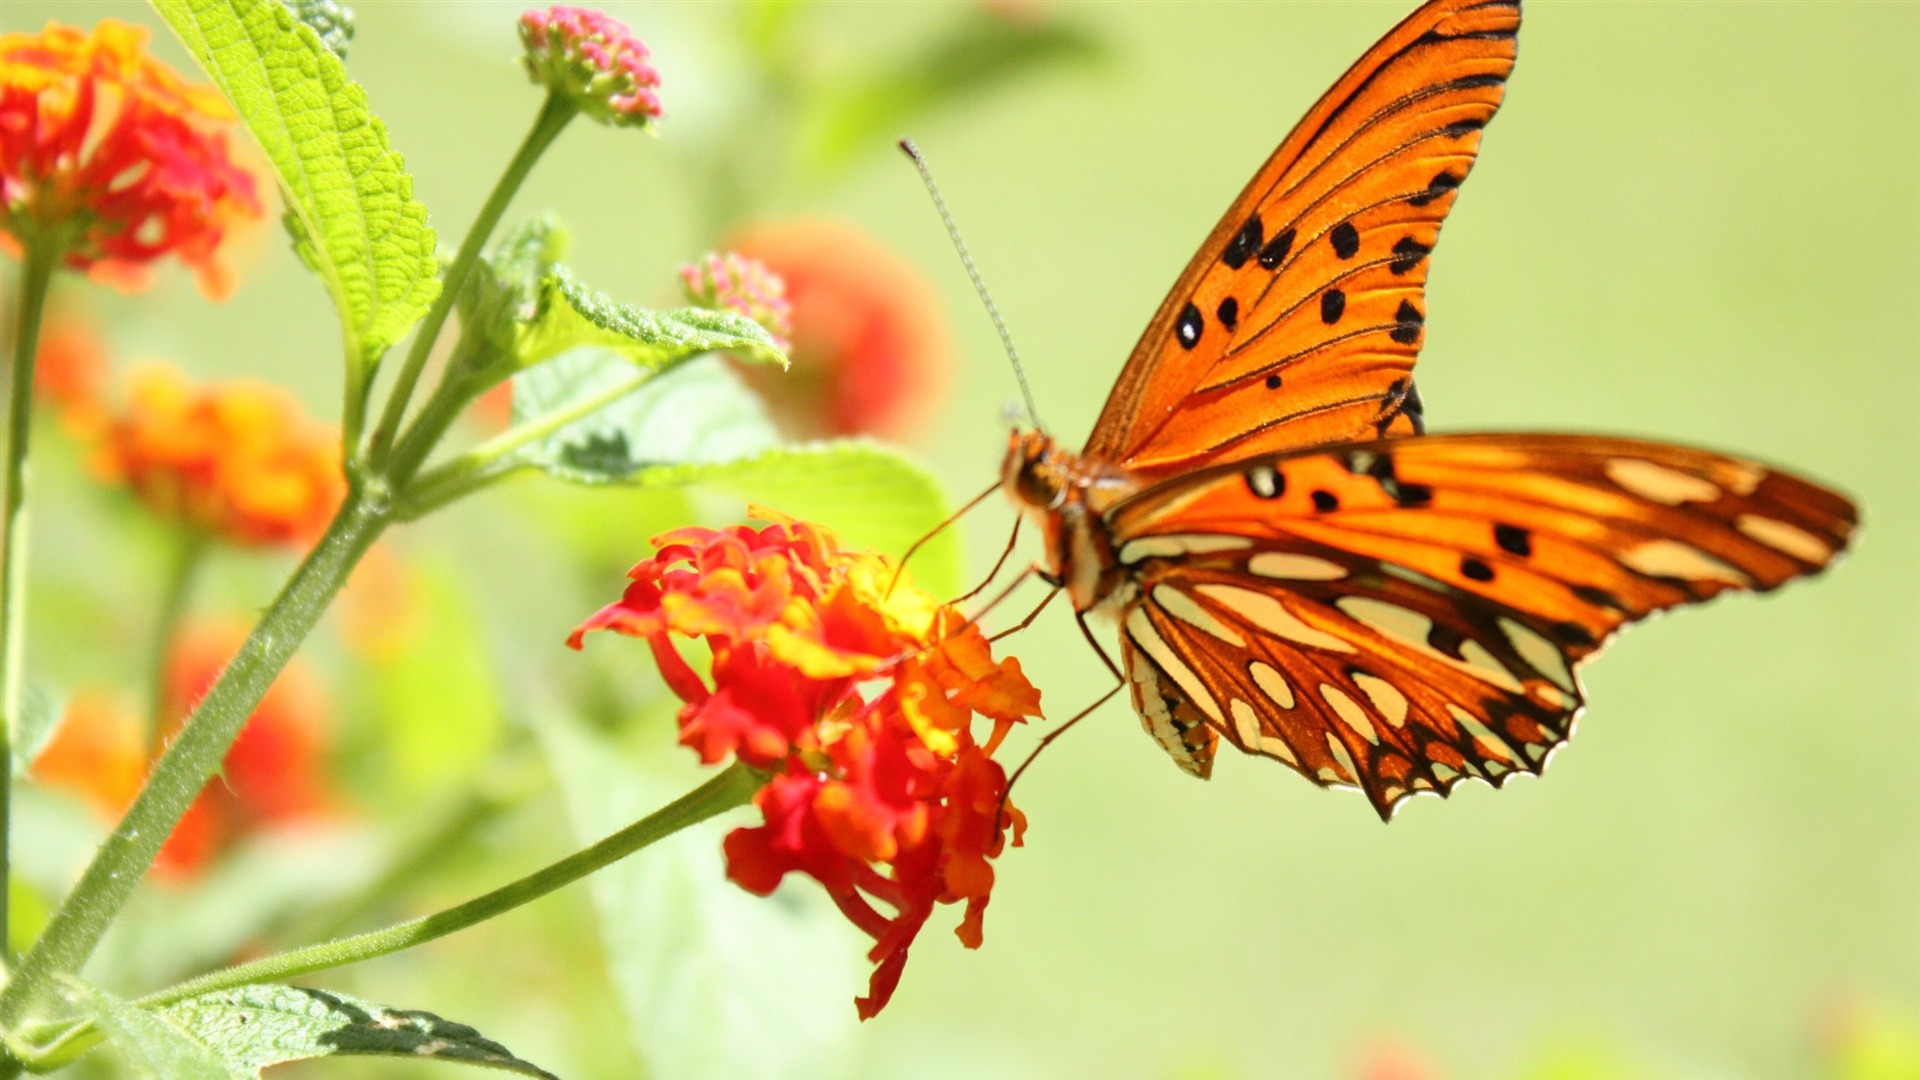 Wallpapers Nature Flowers Butterfly And P Hd 1920x1080 | #375949 ...